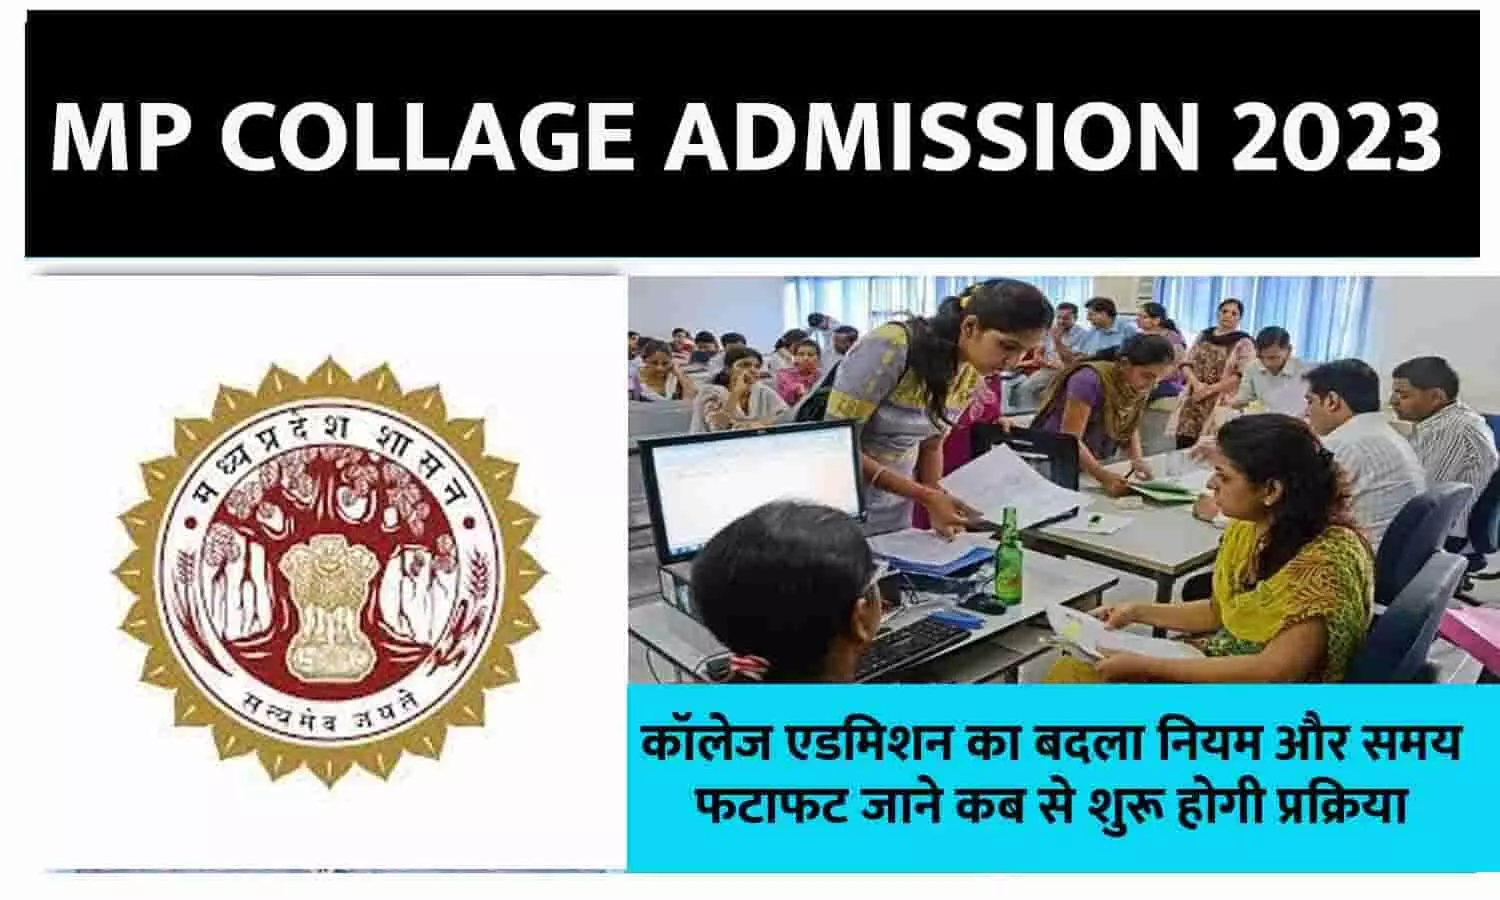 MP COLLAGE ADMISSION 2023